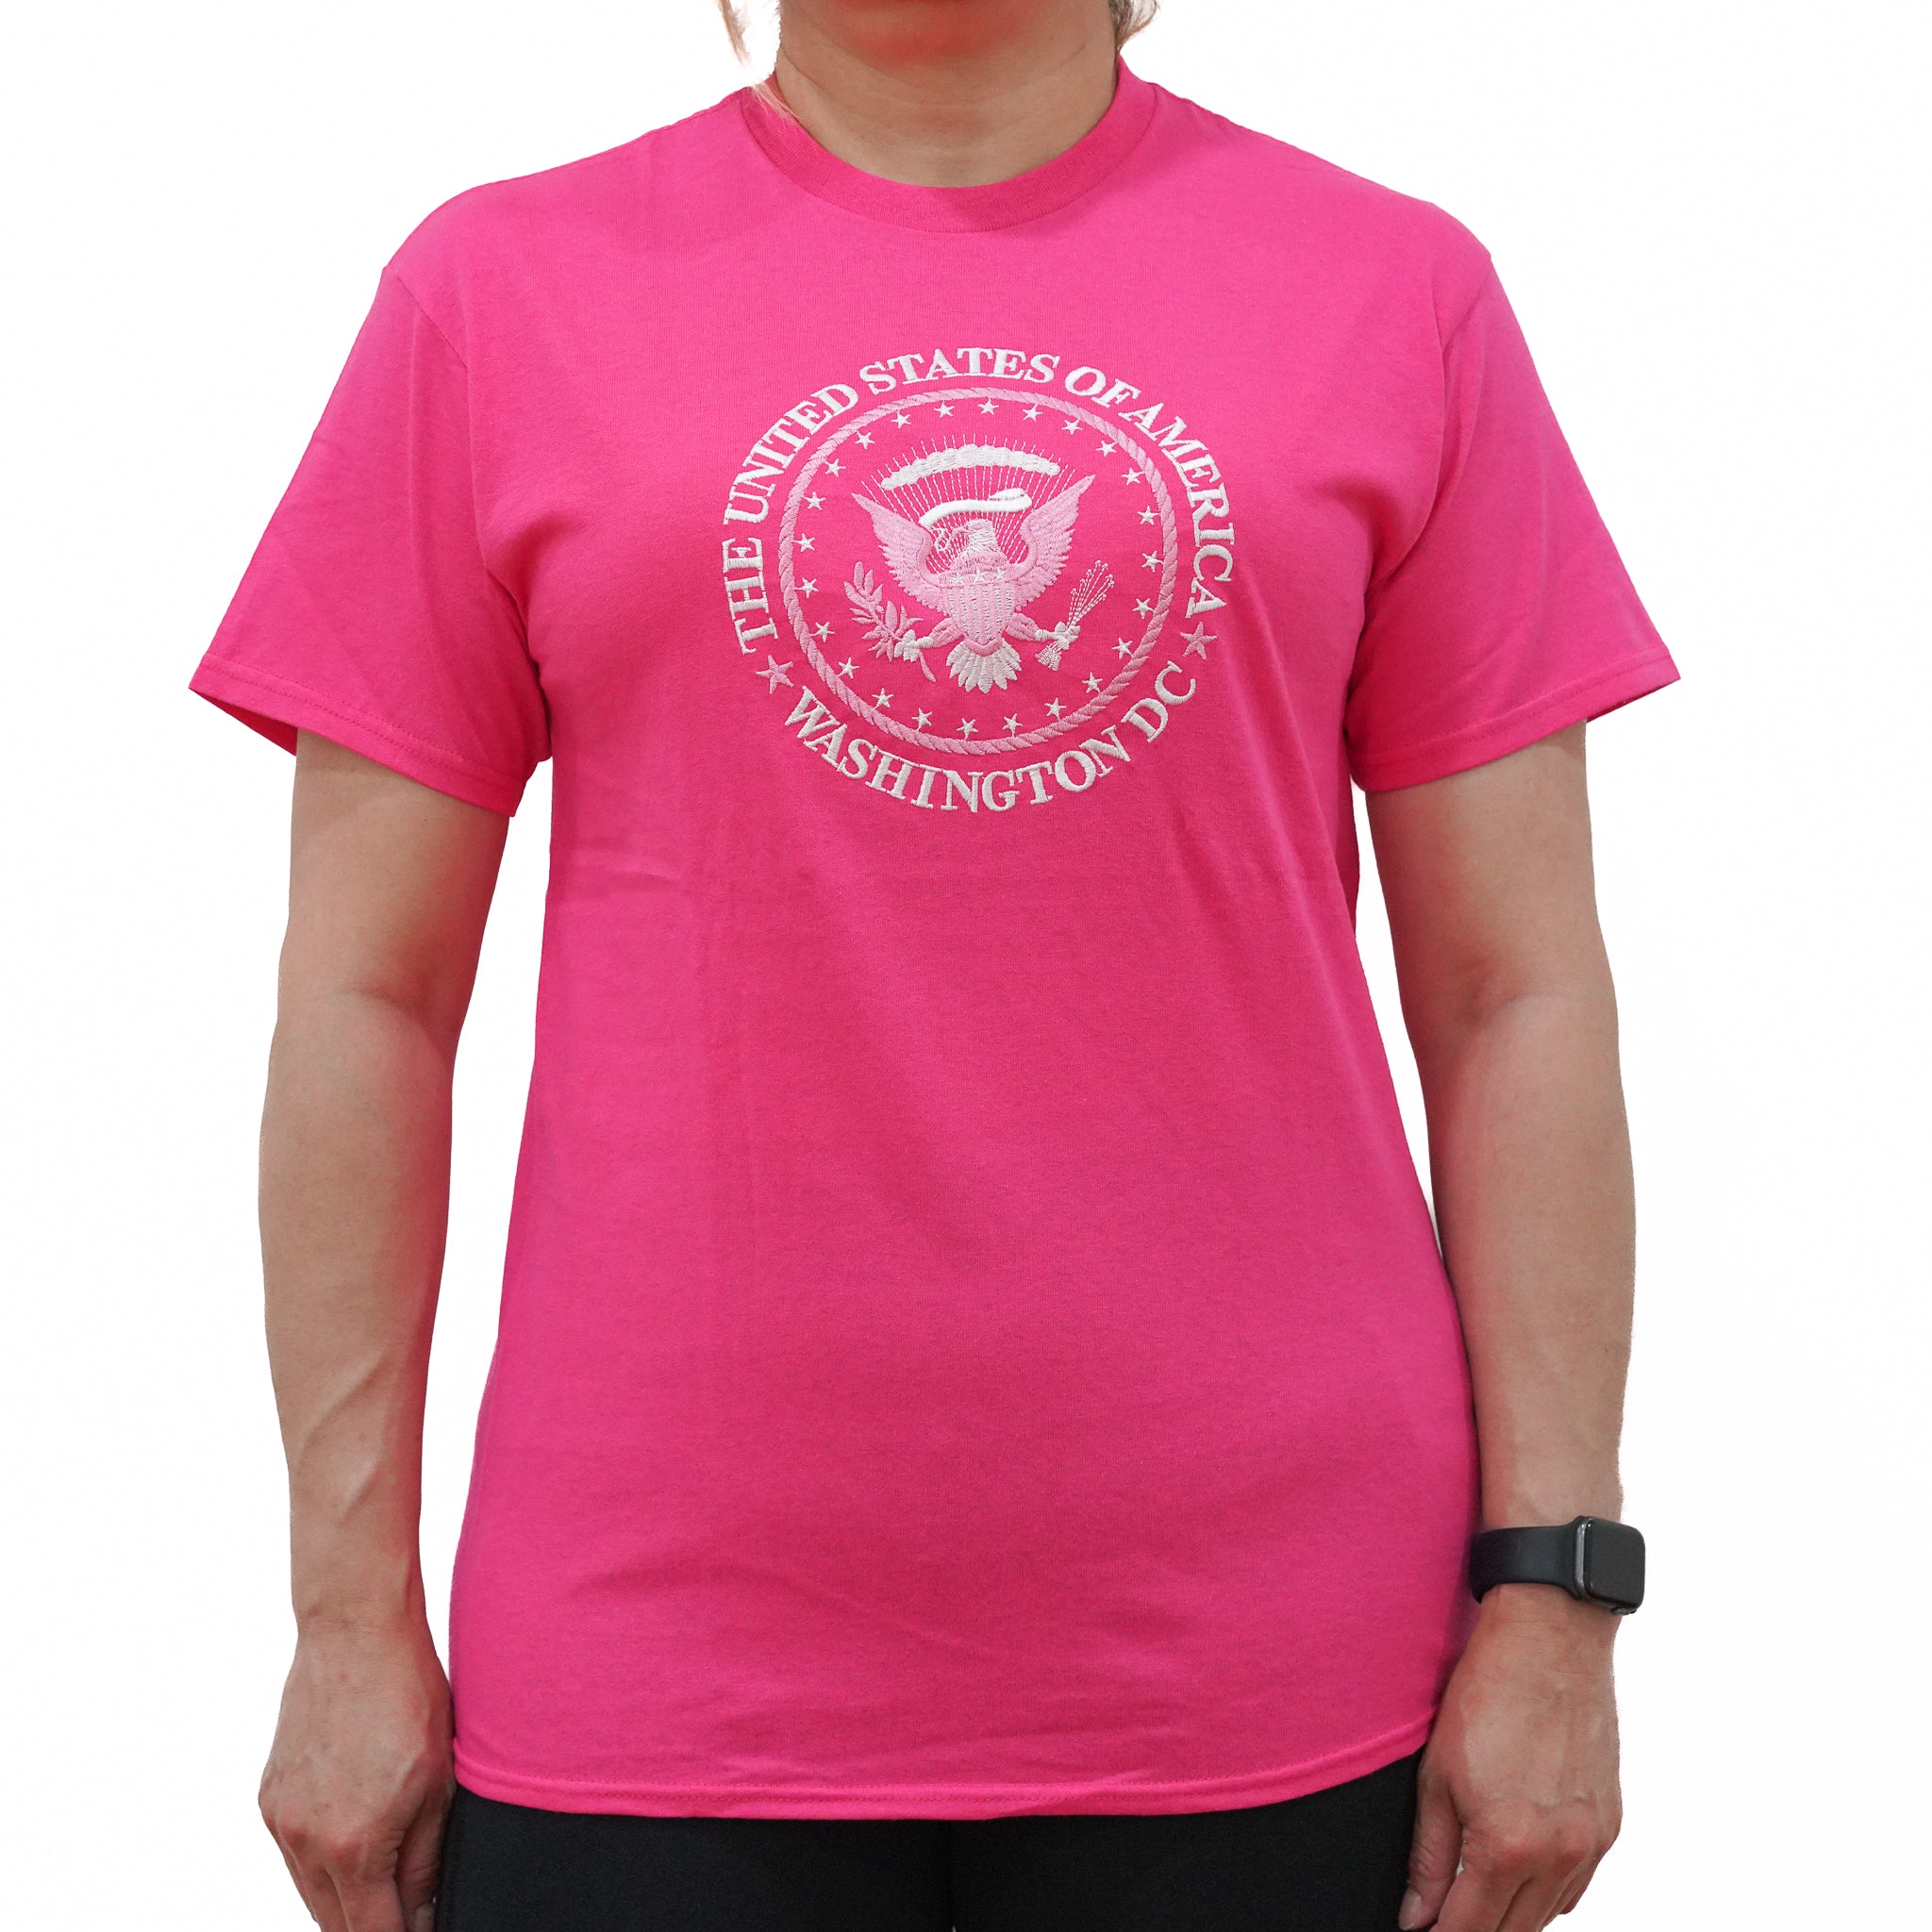 Presidential Seal Embroidered T-Shirt (4 Colors)